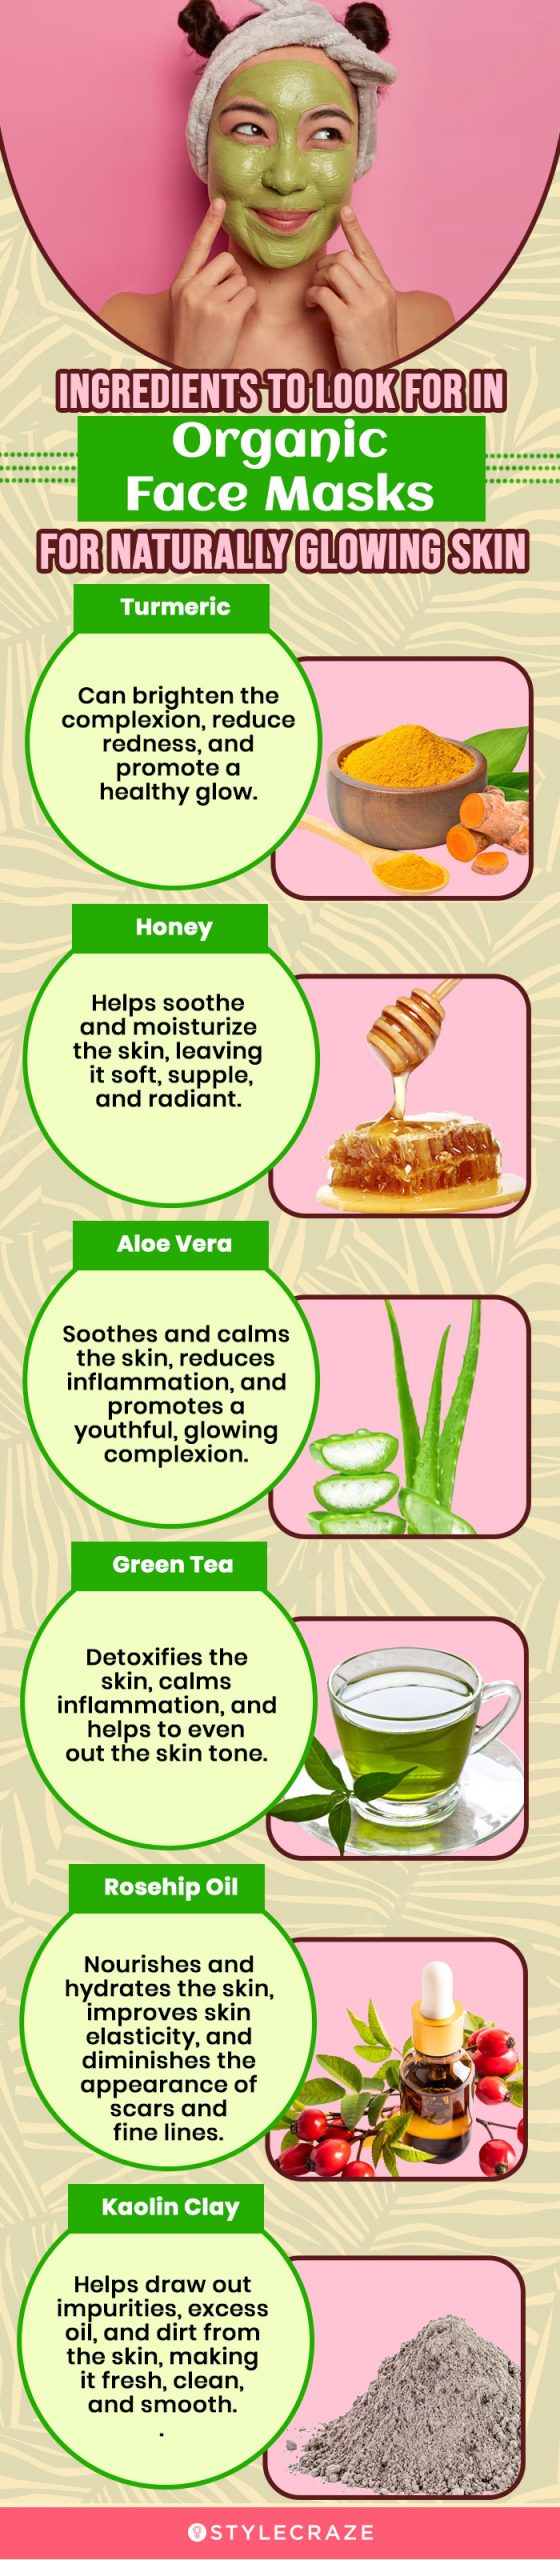 Ingredients To Look For In Organic Face Masks For Naturally Glowing Skin (infographic)